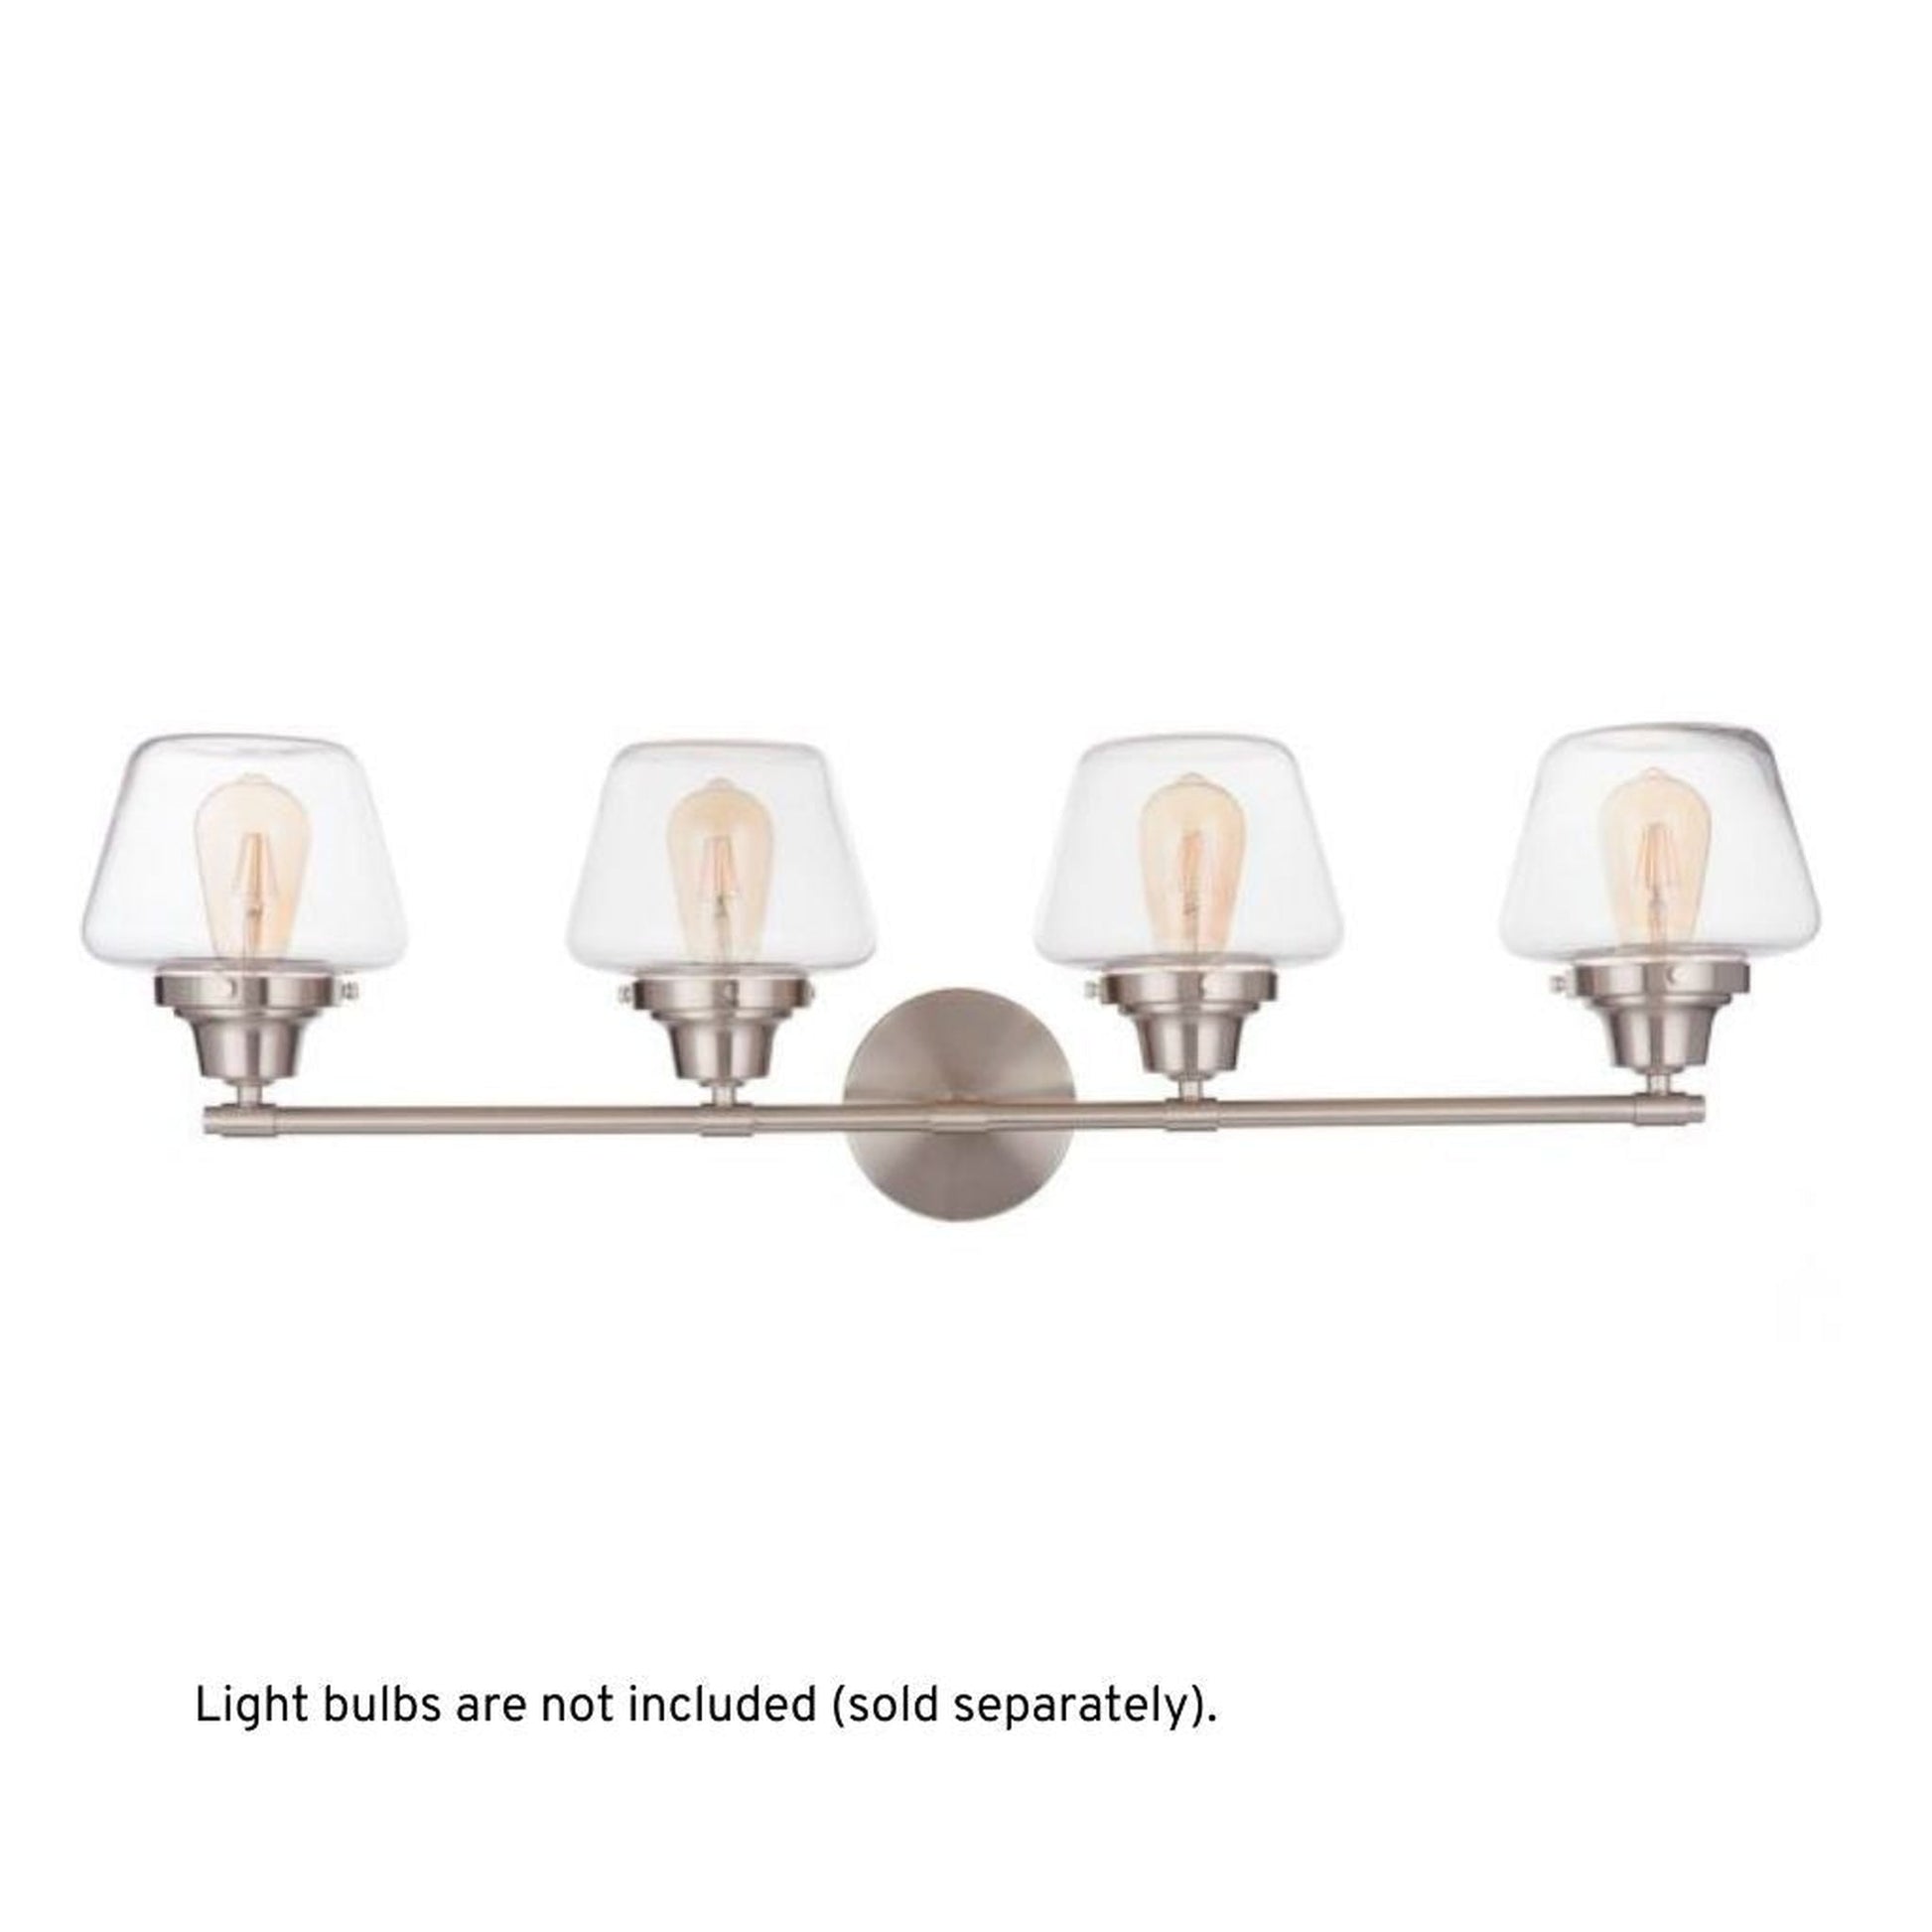 Craftmade Essex 38" 4-Light Brushed Polished Nickel Vanity Light With Clear Glass Shades